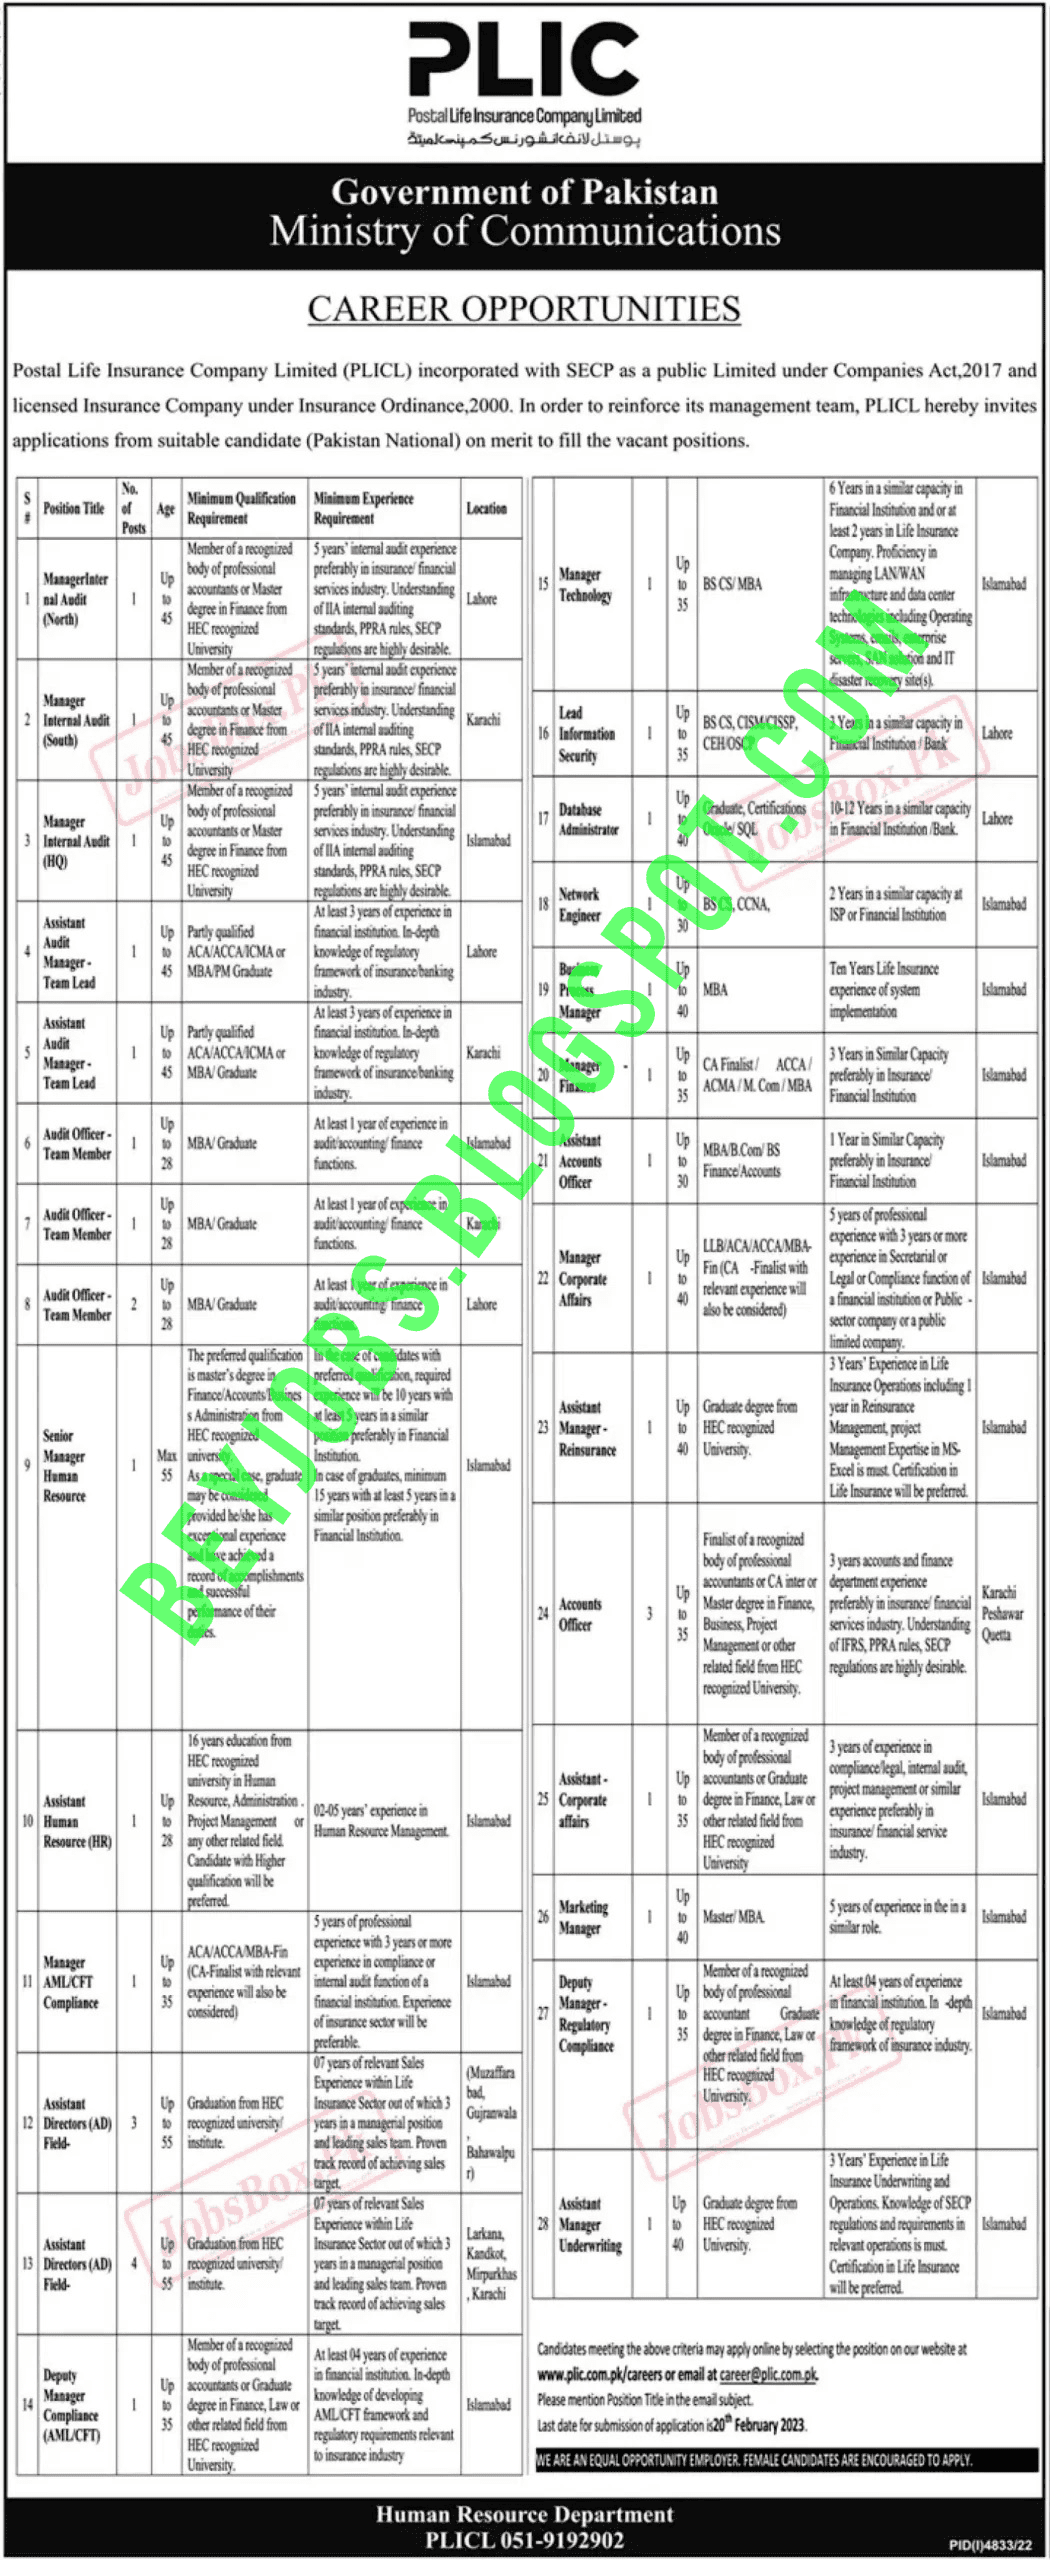 Ministry Of Communication Department Of Pakistan has announced new govt jobs for 24 different Positions for many candidates Last Date 24 Feb 2023.